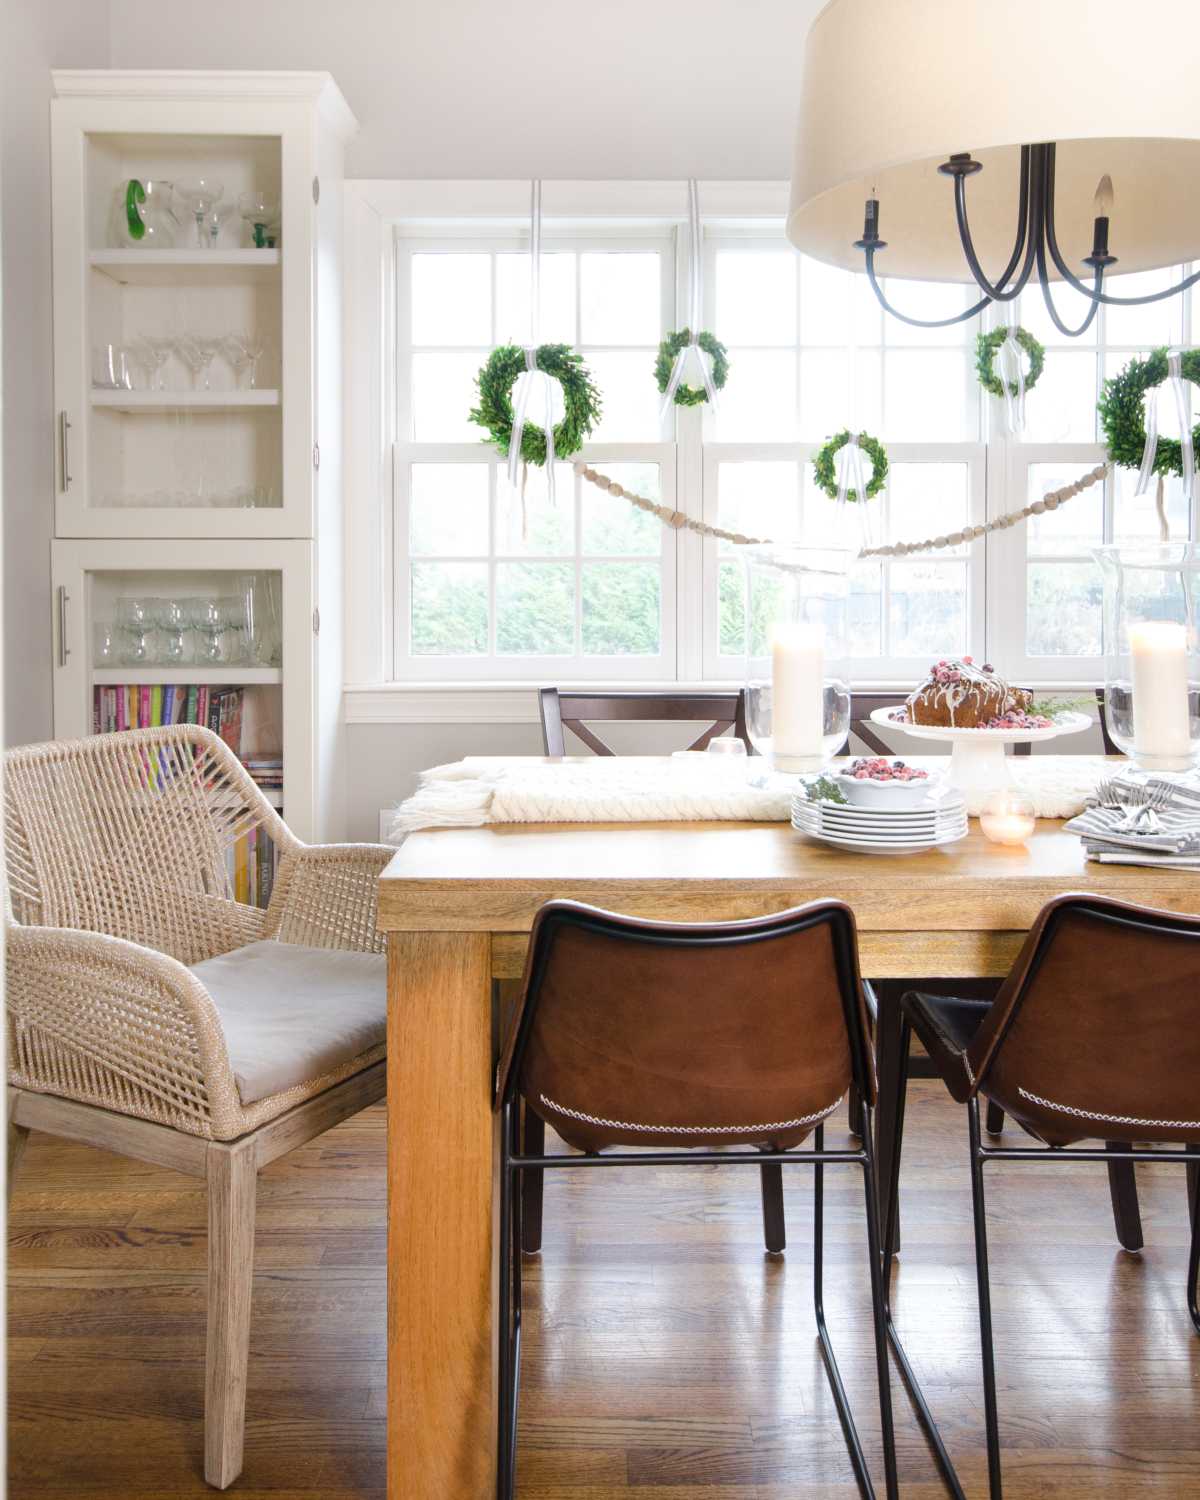 A simple and beautiful classic Christmas kitchen, with breakfast nook